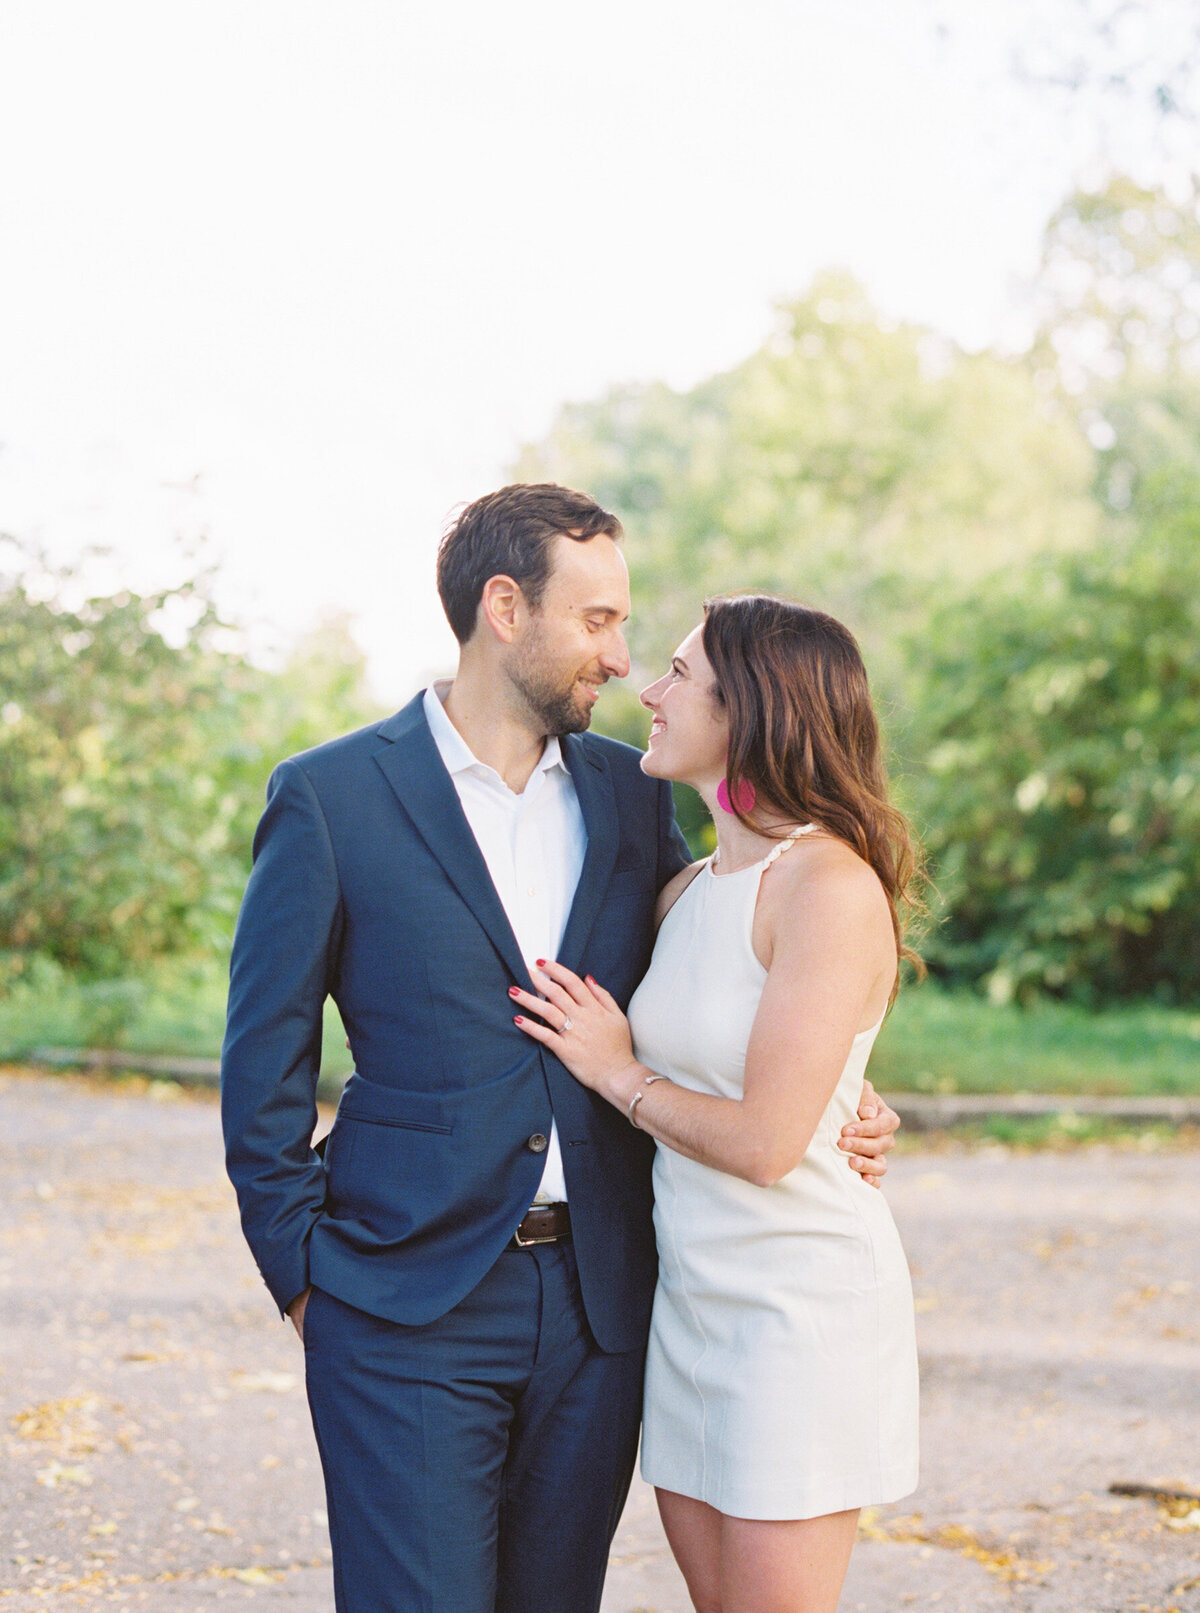 Lincoln Park Chicago Fall Engagement Session Highlights | Amarachi Ikeji Photography 33